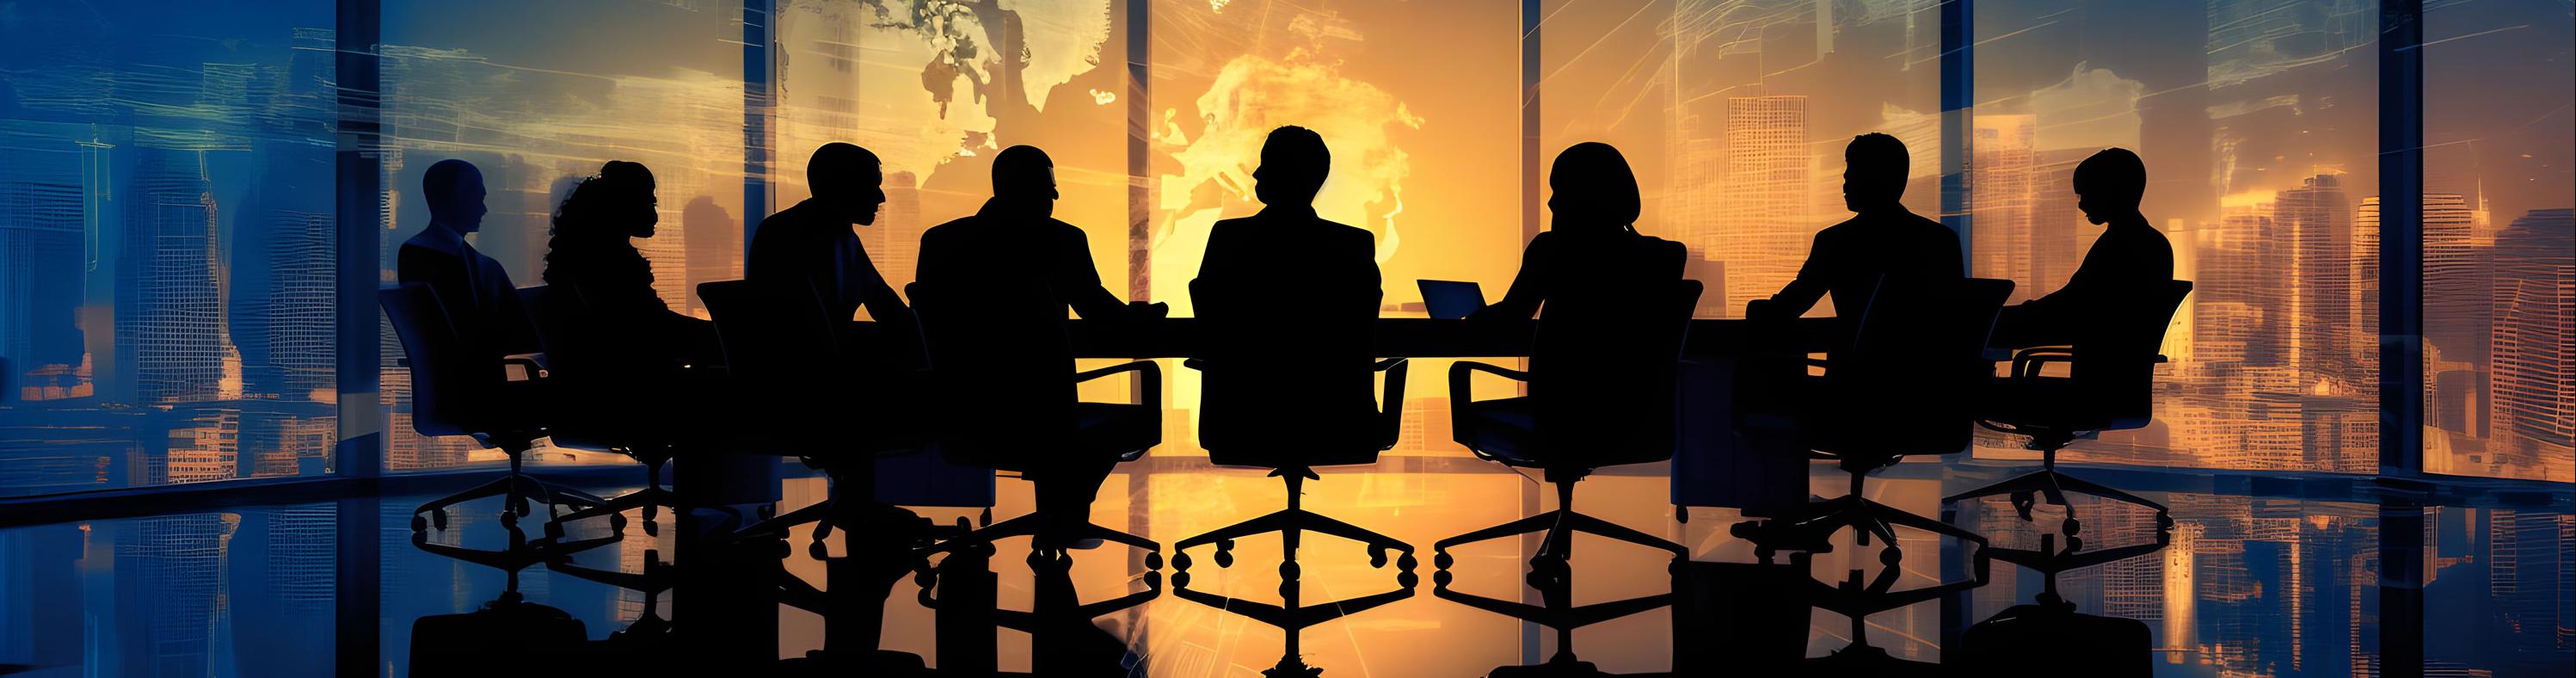 Silhouetted group of people seated at a conference table, looking at a map of the world with text that reads “LMI Advisory Council Established”. 